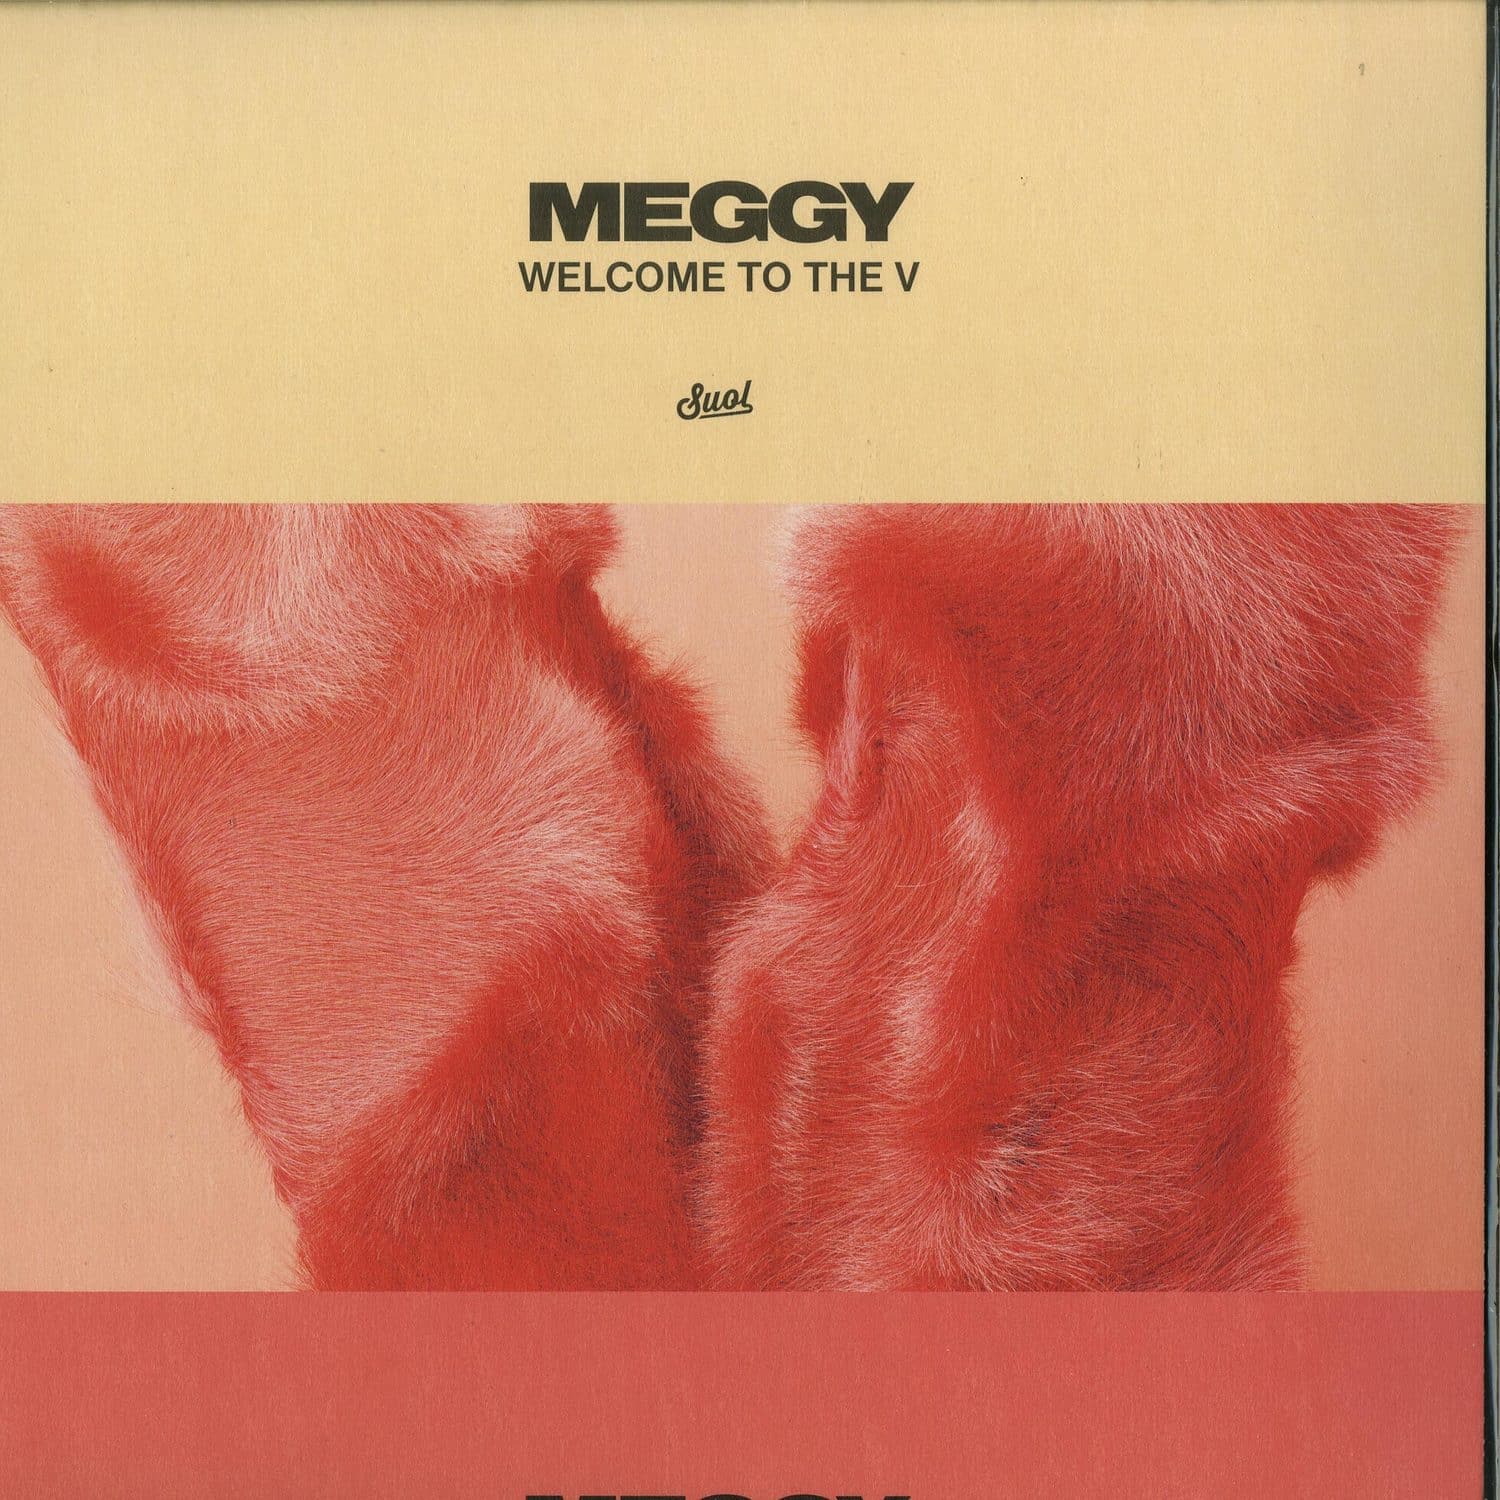 Meggy - WELCOME TO THE V